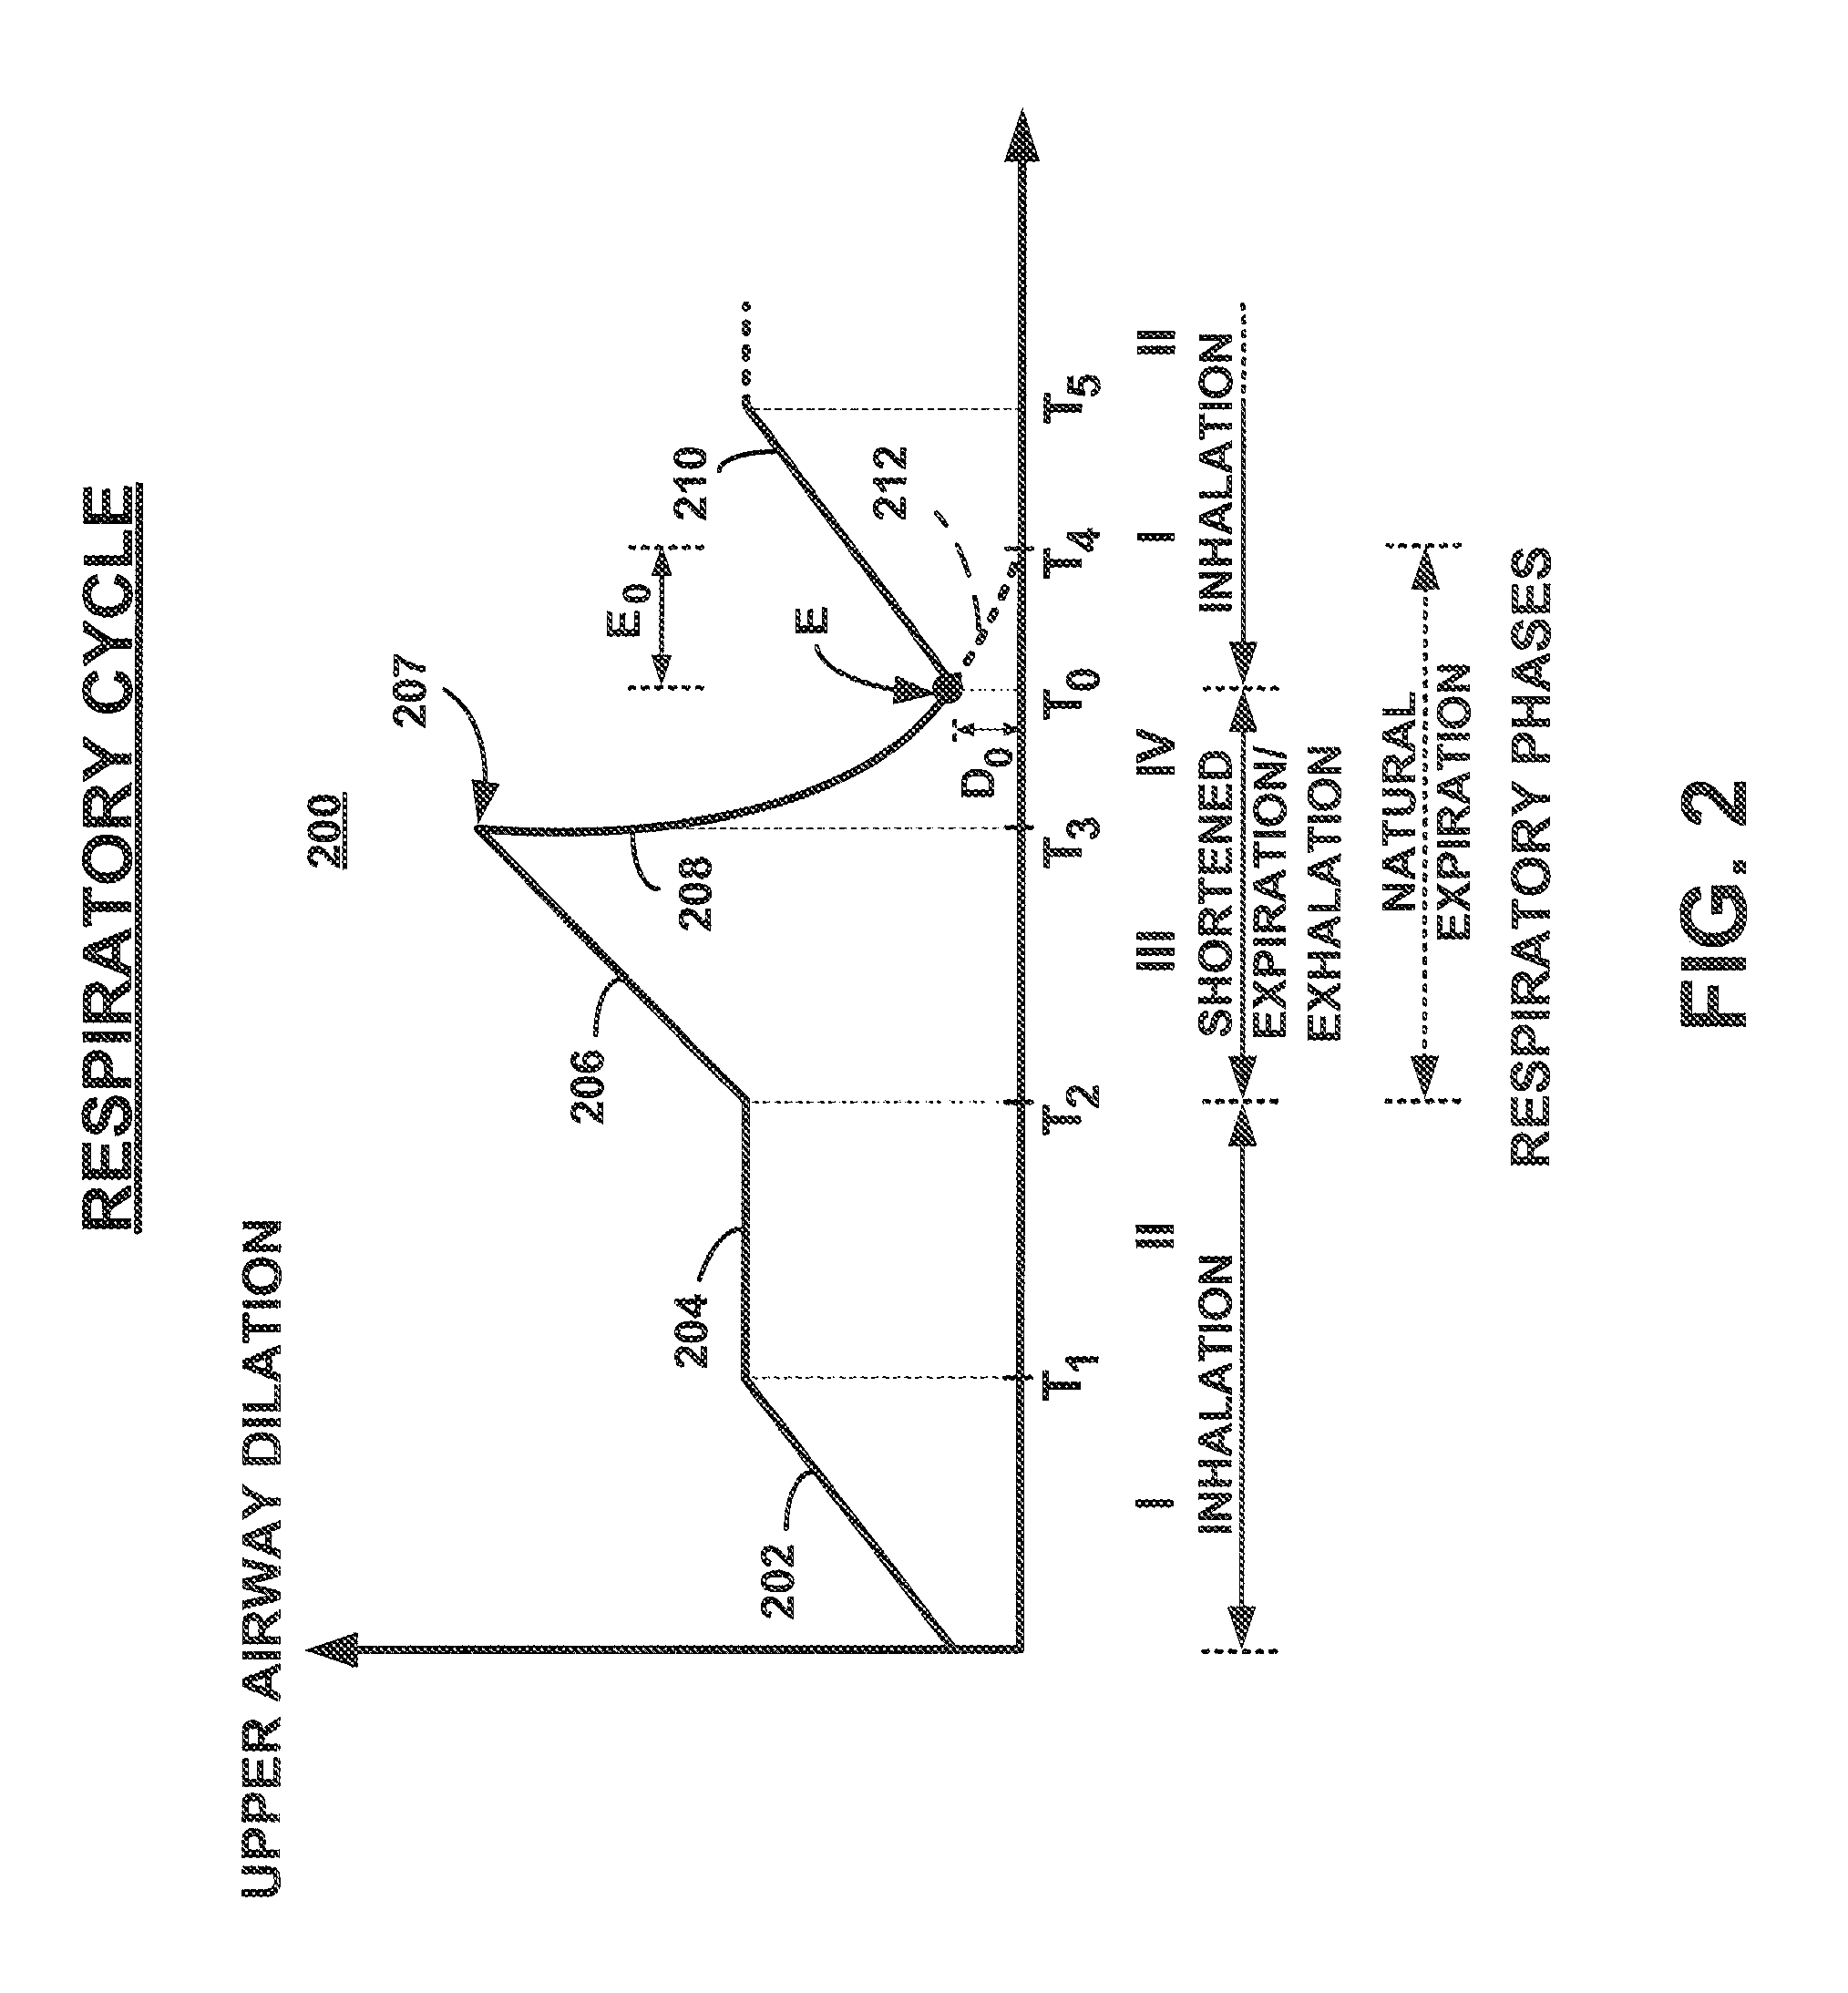 Discontinuous Positive Airway Pressure Device And Method Of Reducing Sleep Disordered Breathing Events